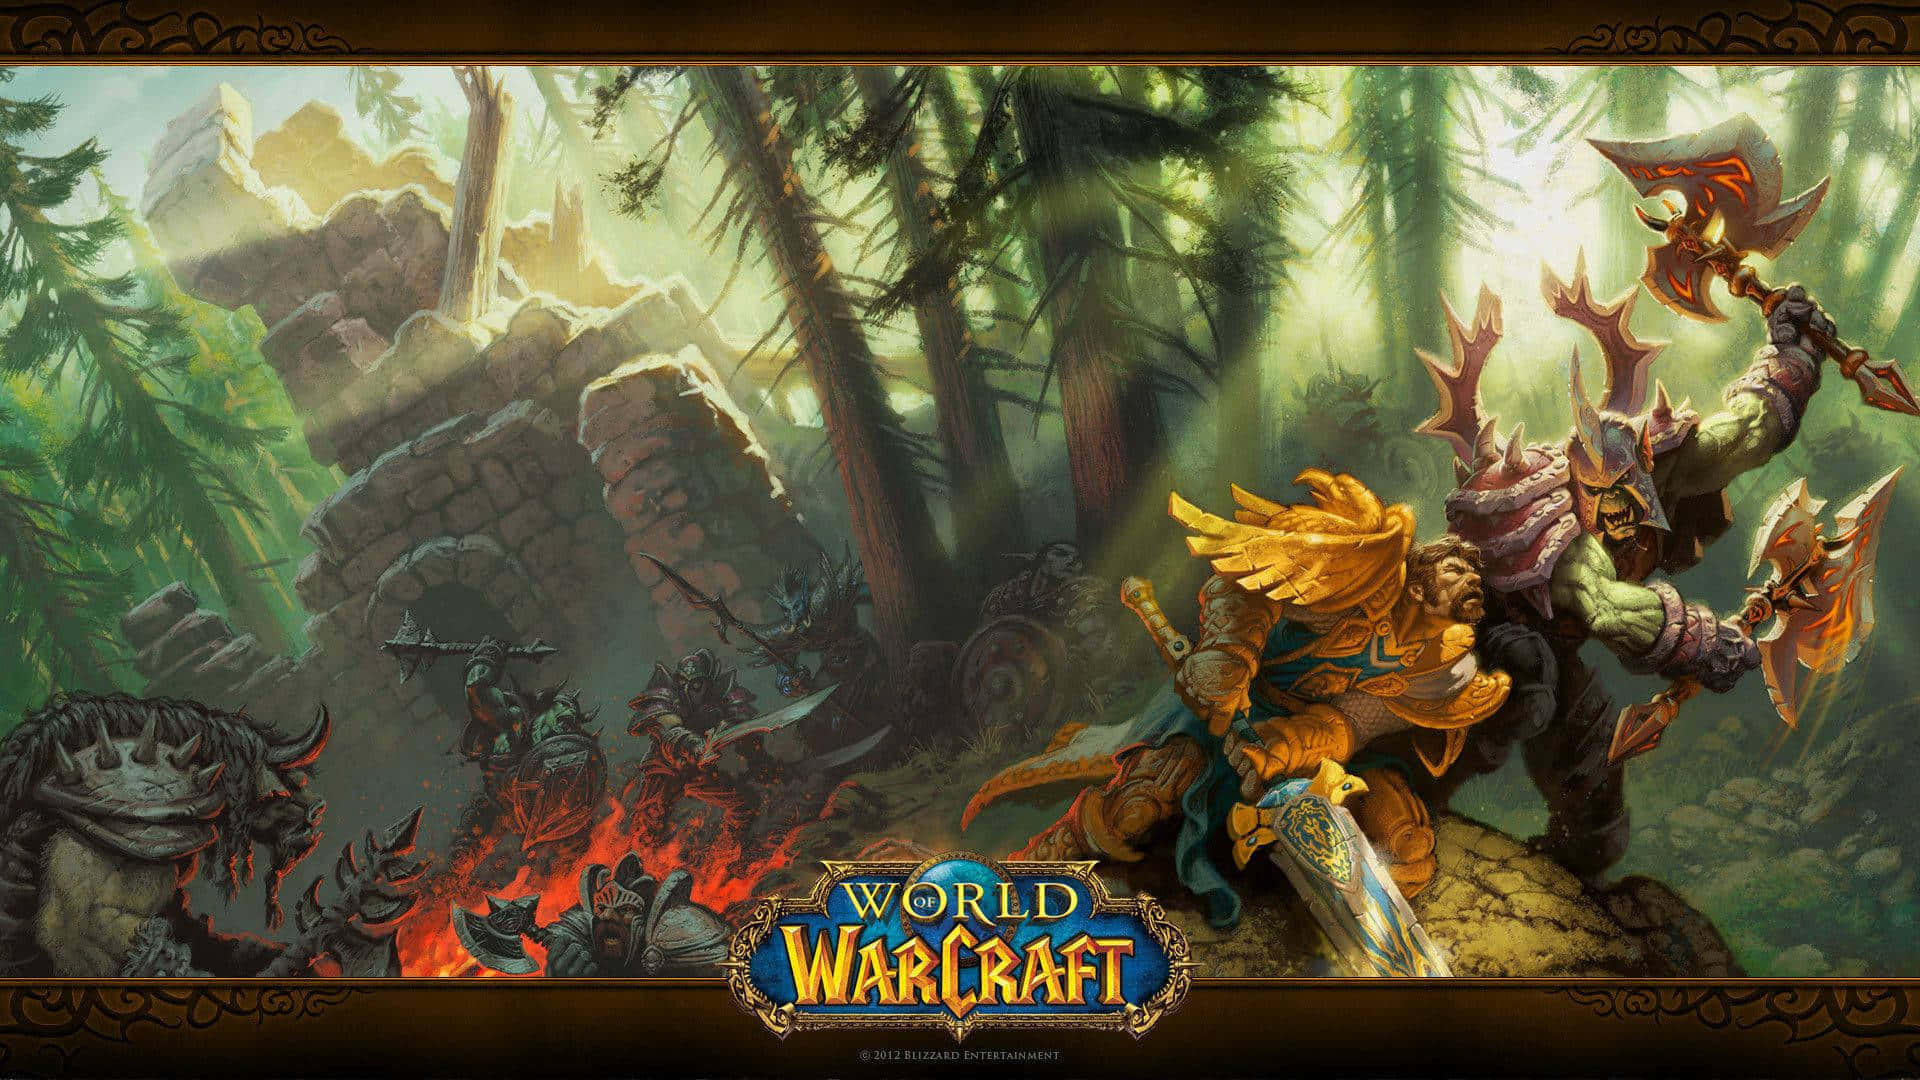 Play World Of Warcraft in stunning HD Wallpaper